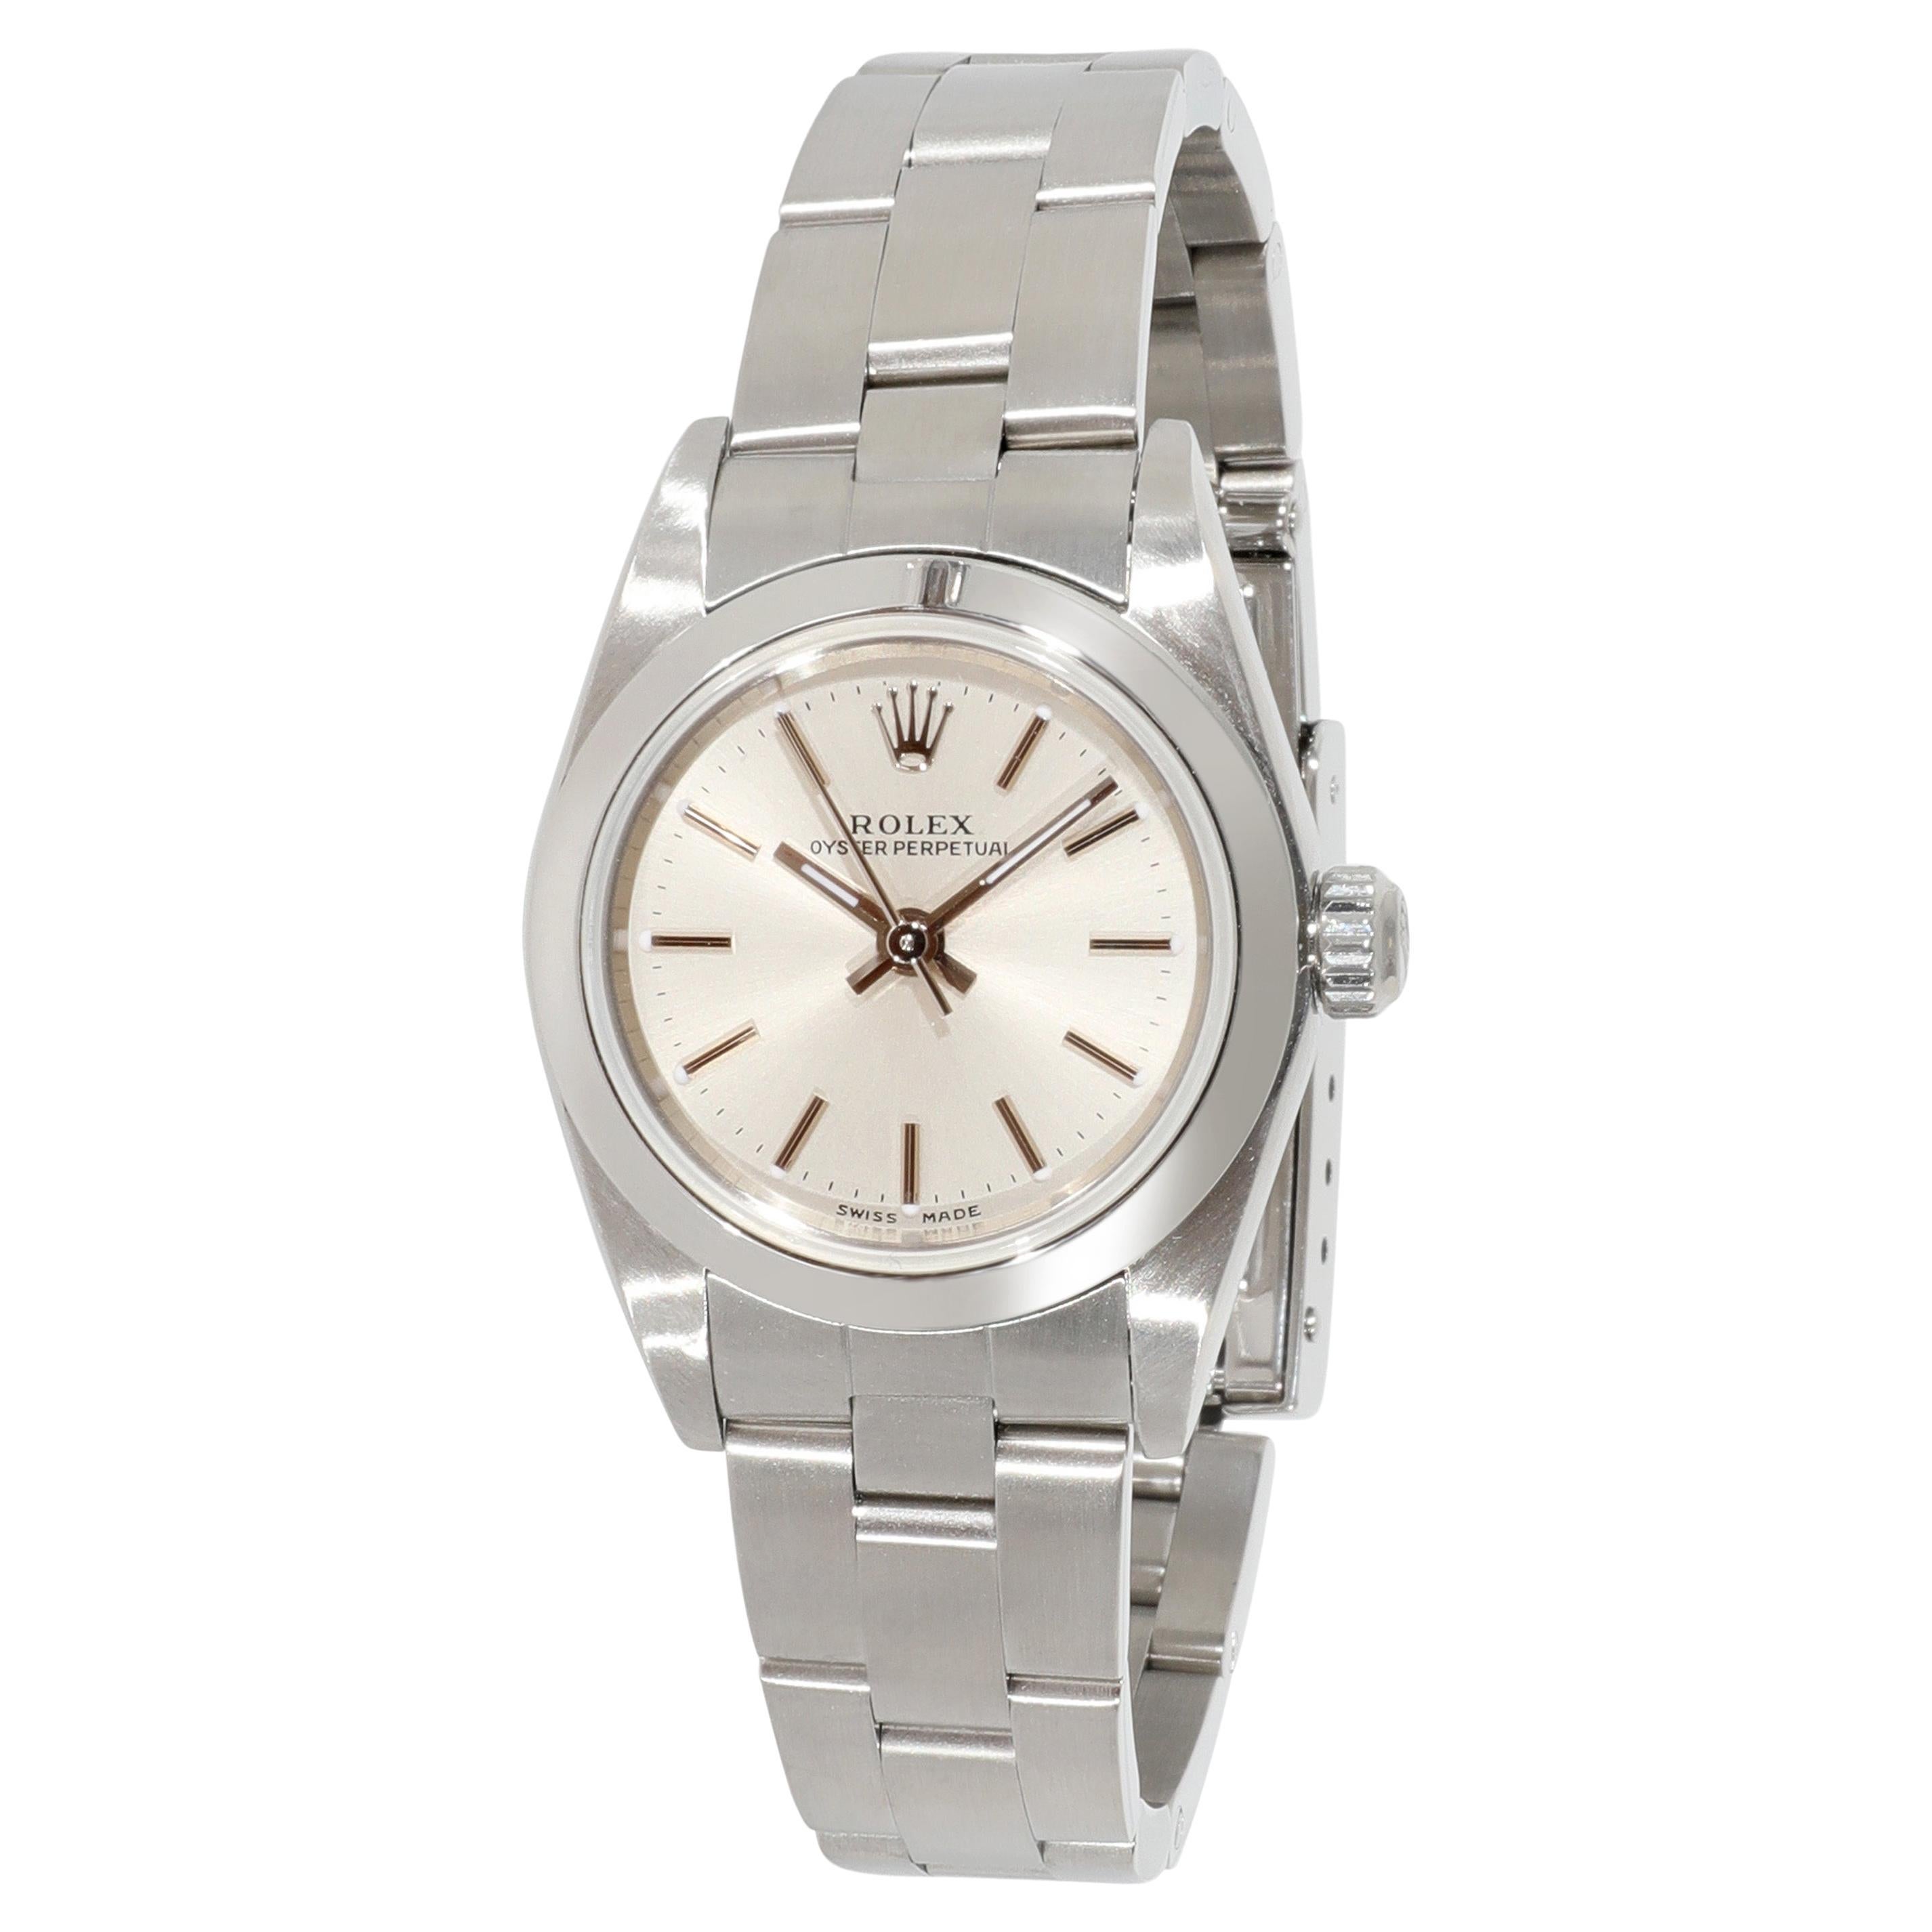 Rolex Oyster Perpetual 76080 Women's Watch in Stainless Steel